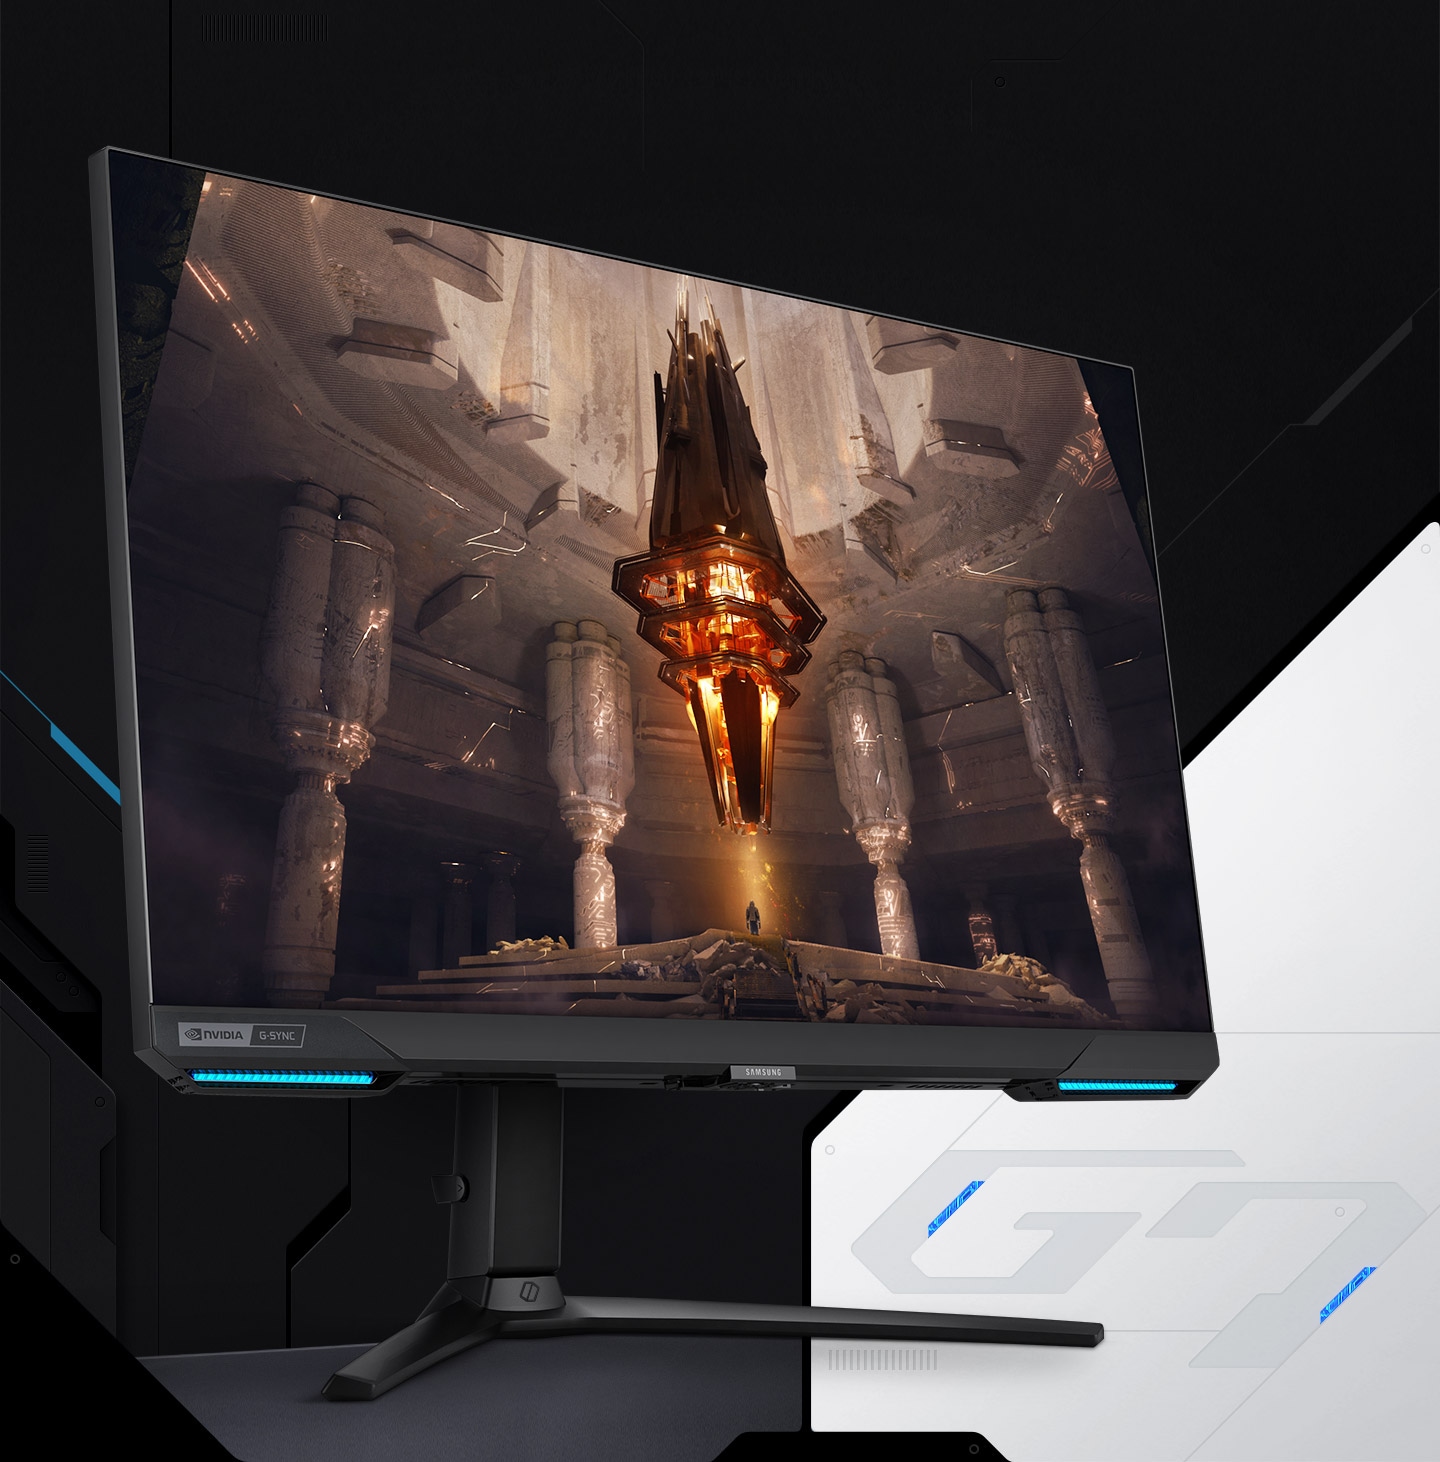 On the monitor display is a orange rocket ship with light emitting from its engine exhausts inside an underground cave. The rocket ship is set to launch out of the opening above, and surrounded by stone pillars and steps. \G7\ logo is placed on the right side of the monitor stand.